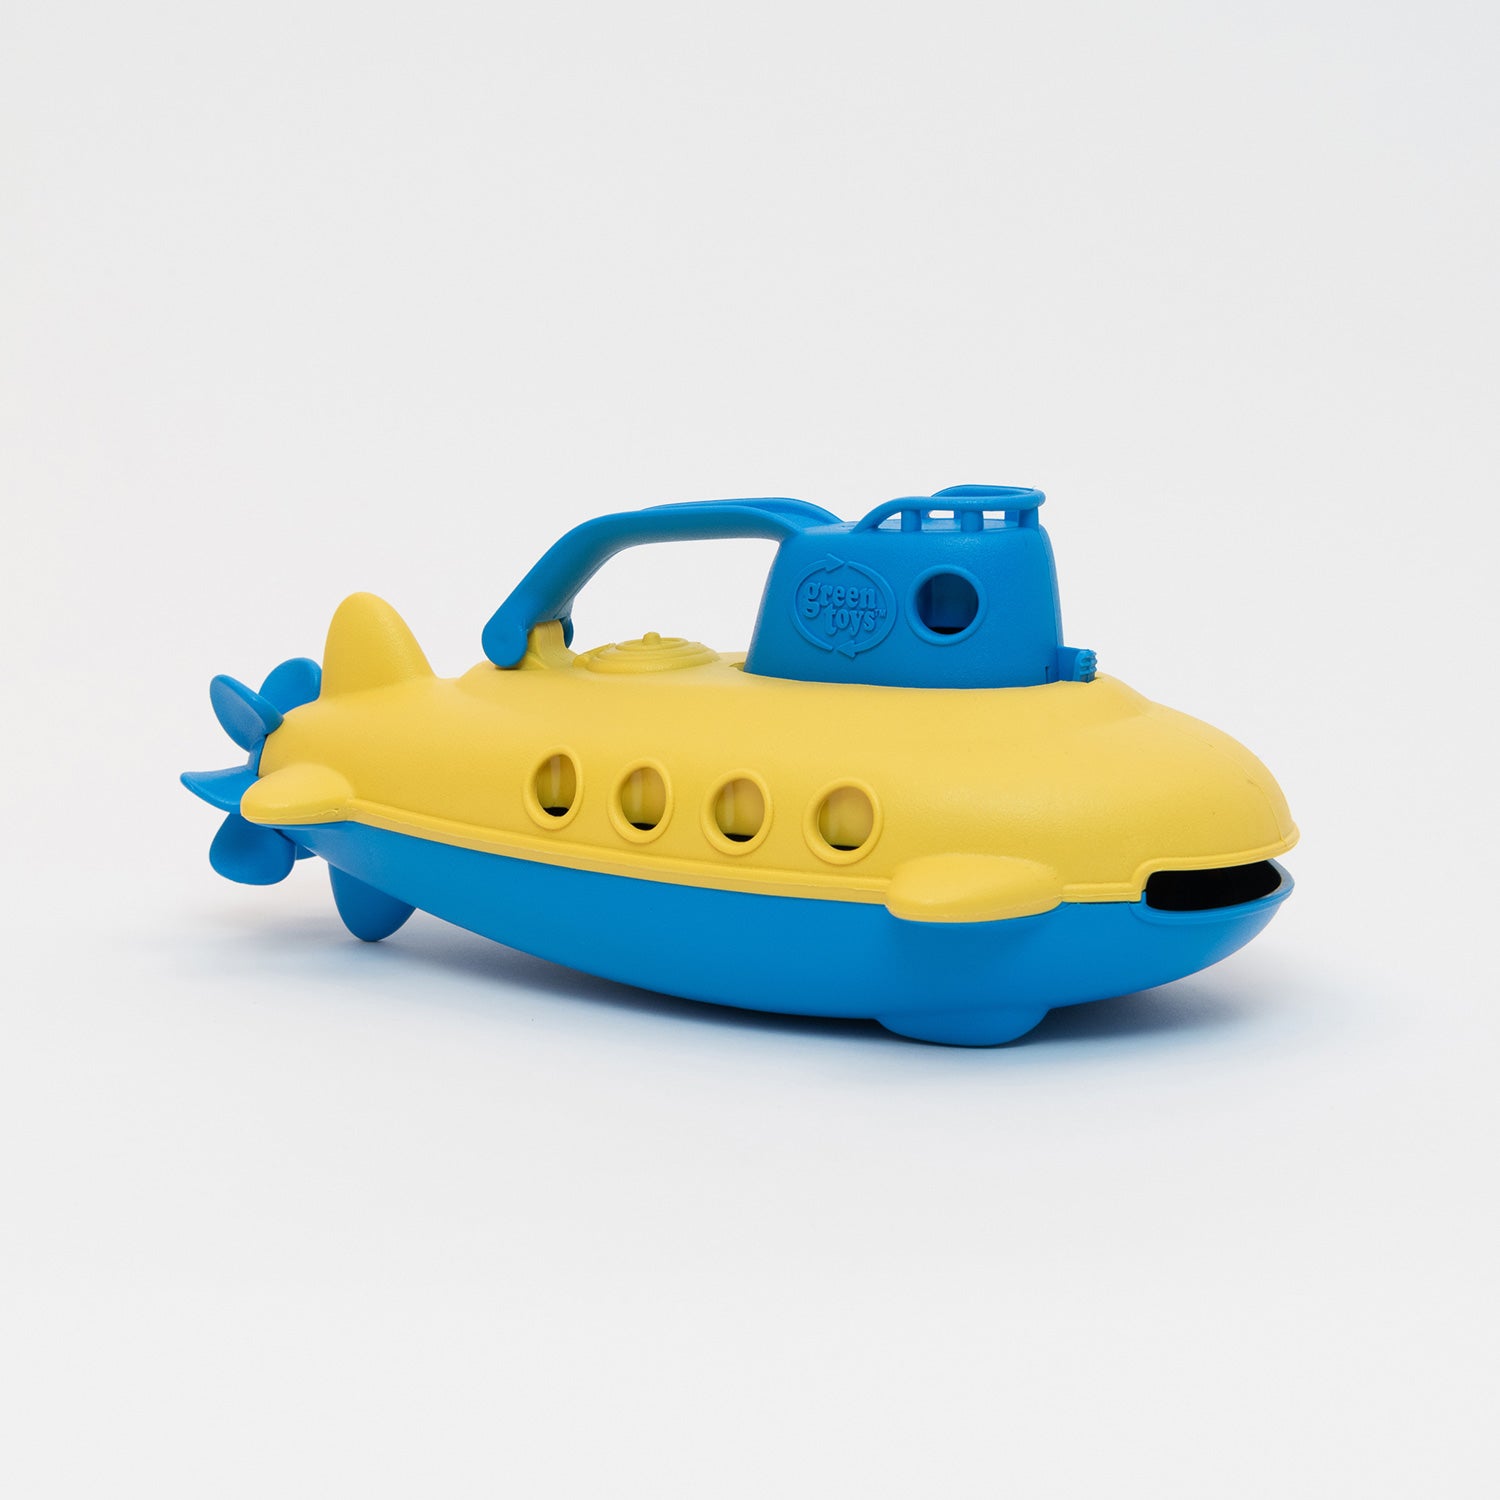 A photo of the yellow and blue Green Toys Submarine bath toy, unboxed.